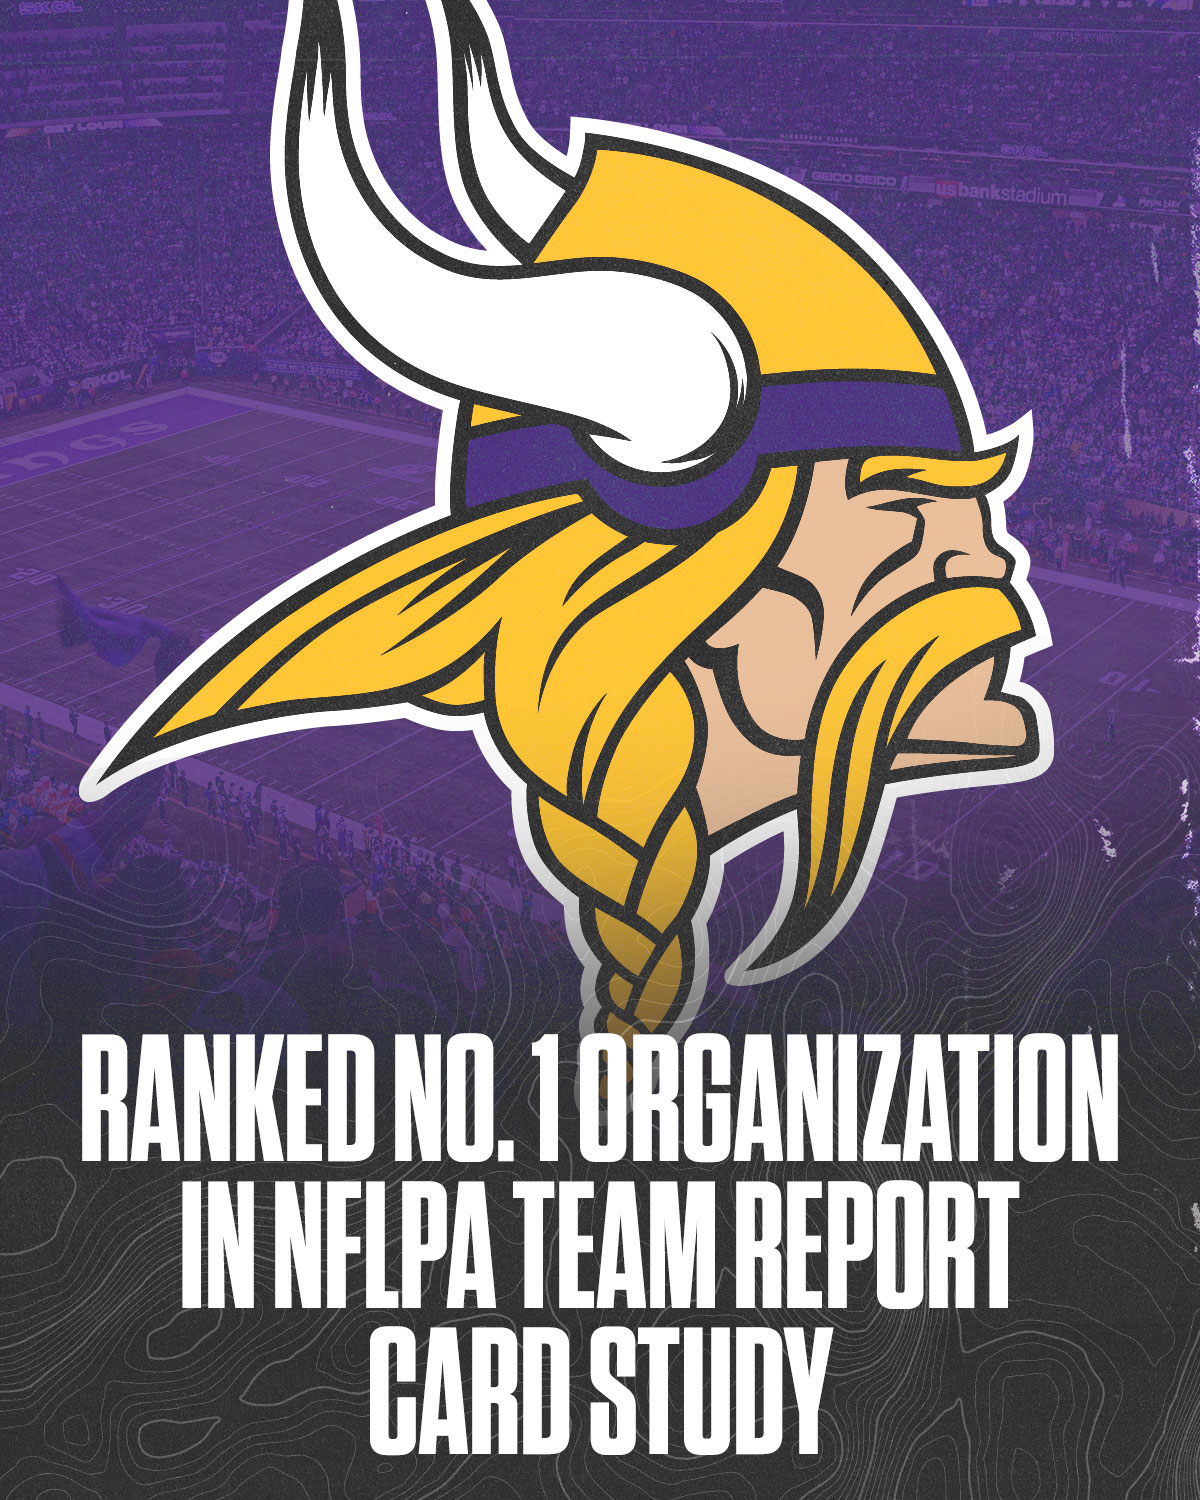 Sunday Night Football on NBC on #NFL players participated in the The Minnesota Vikings had the best report of the 32 teams. https://t.co/q8nwudDK3x" / Twitter